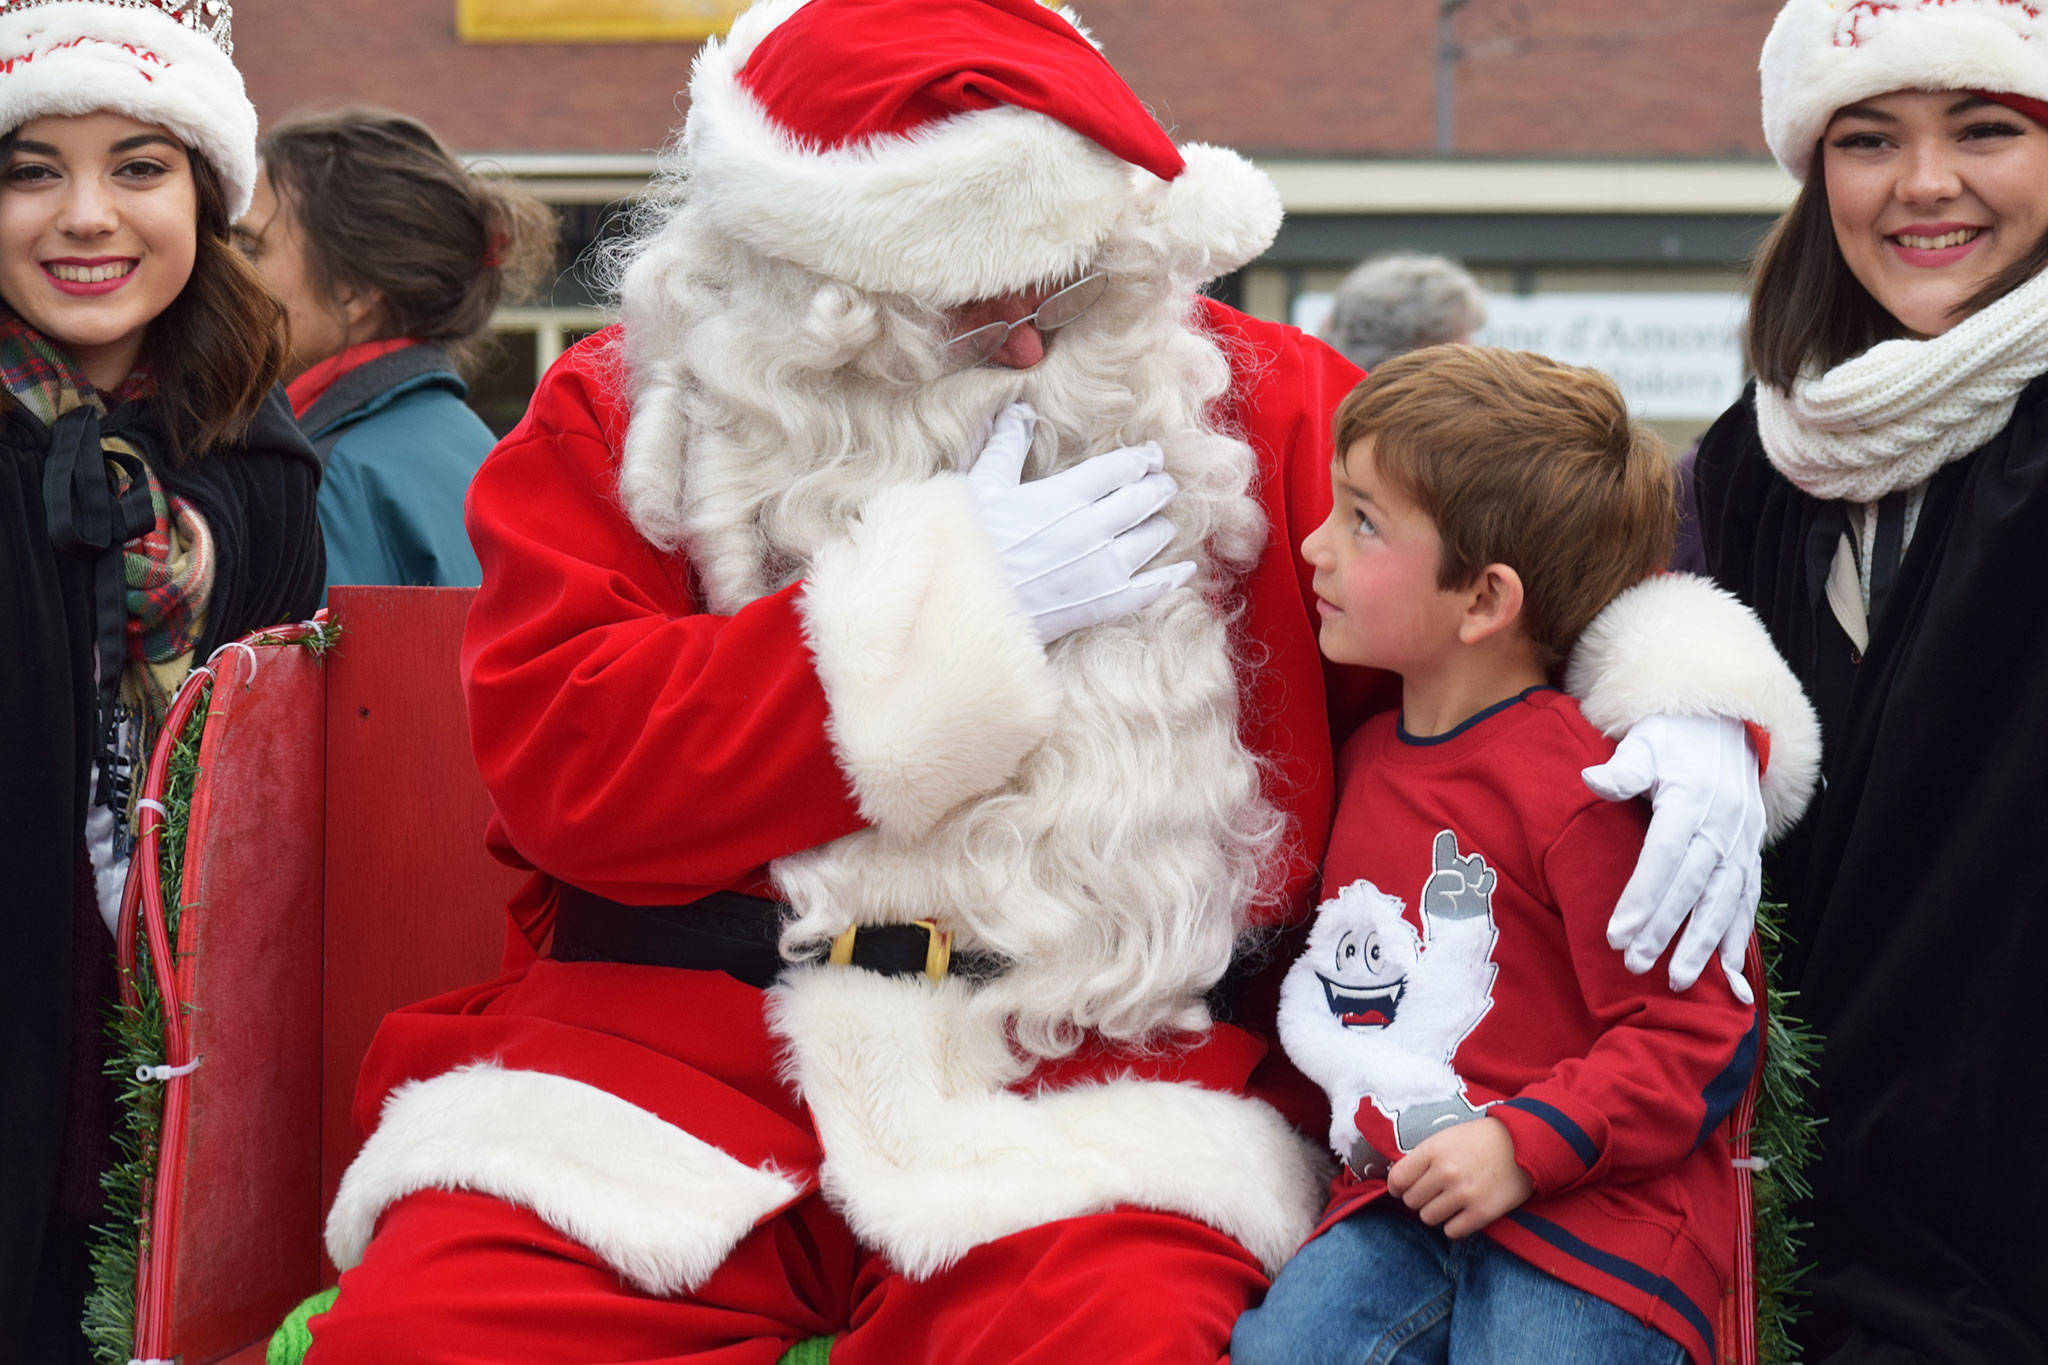 Santa Claus talks with Adrian Endicott, 5, as Sequim Irrigation Festival princesses Liliana Williams, left, and Gabi Simonson, right, look on during Home Town Holidays at the corner of Sequim Avenue and Washington Street on Nov. 24. Sequim Gazette photos by Erin Hawkins